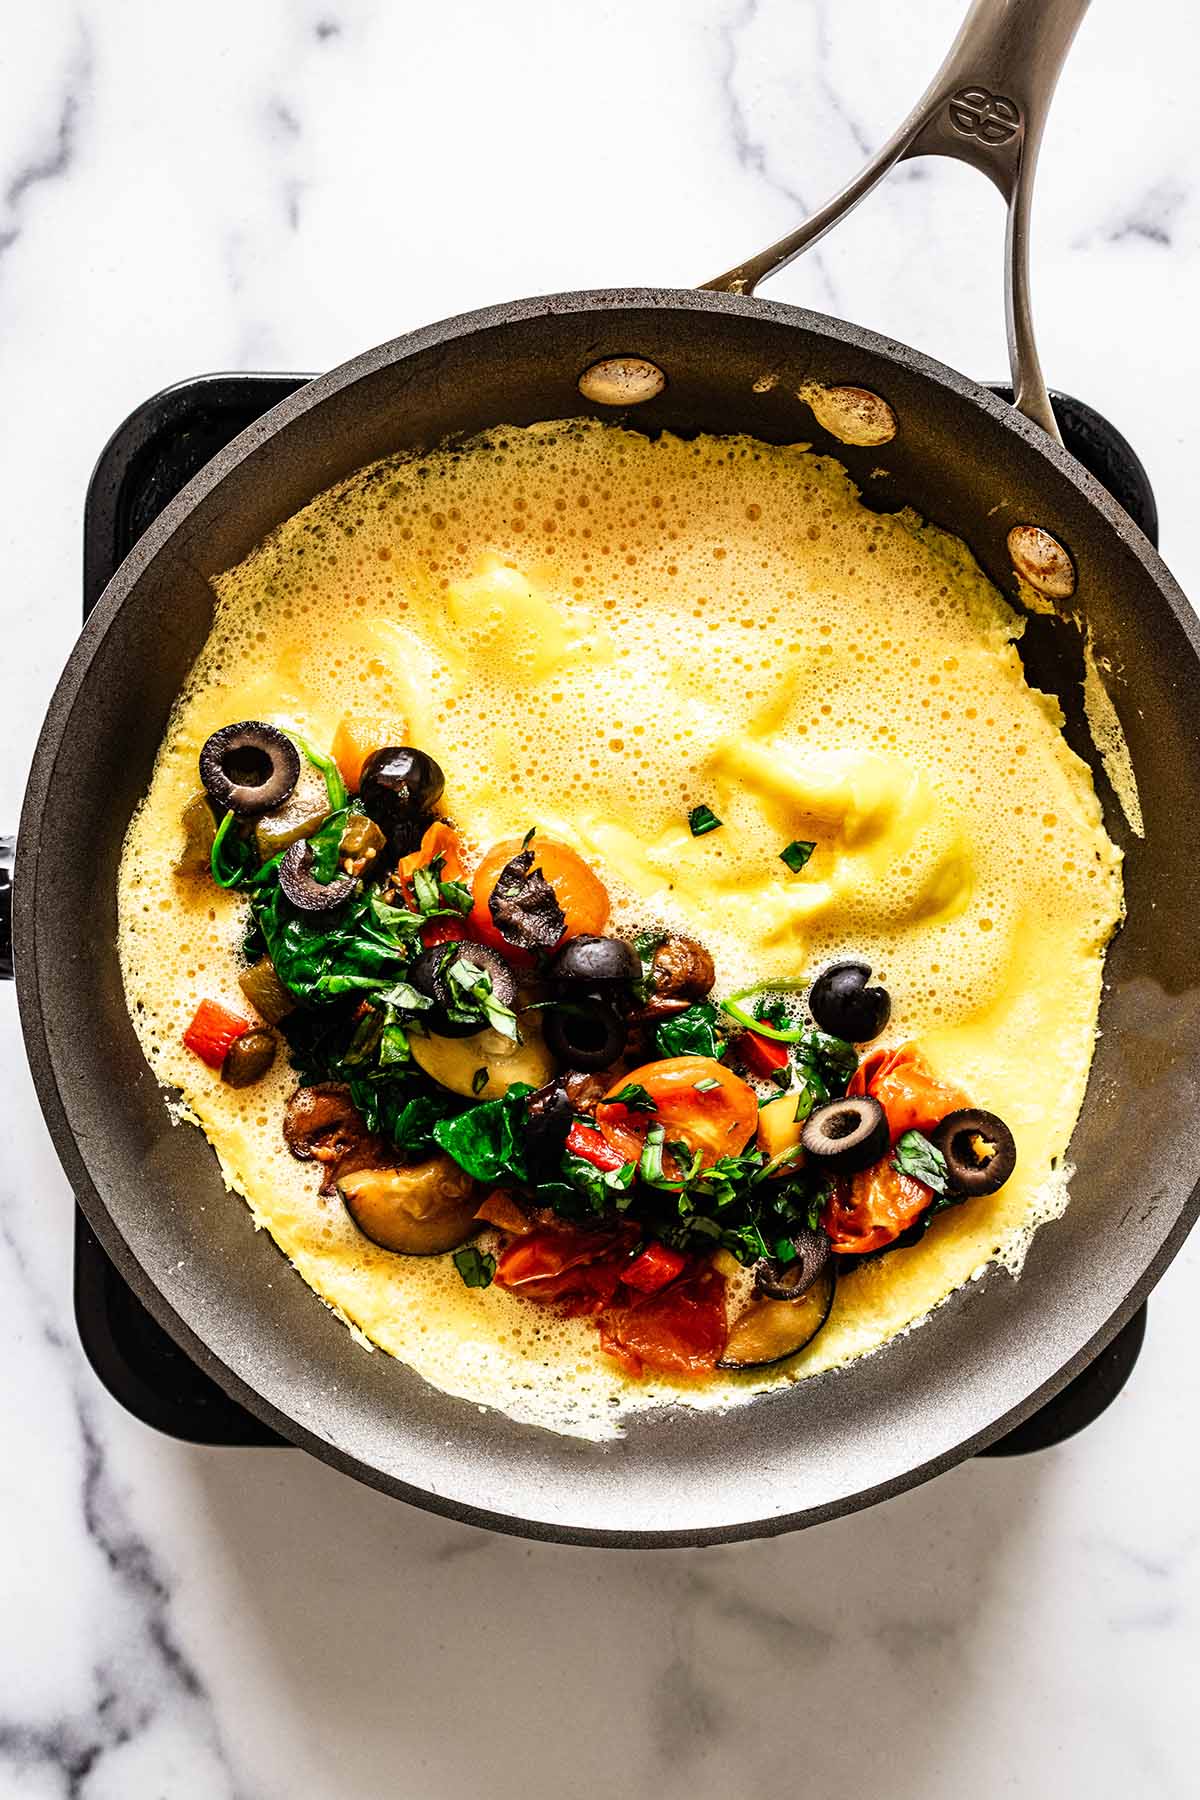 Vegetable mixture on one half of an open omelette in a skillet